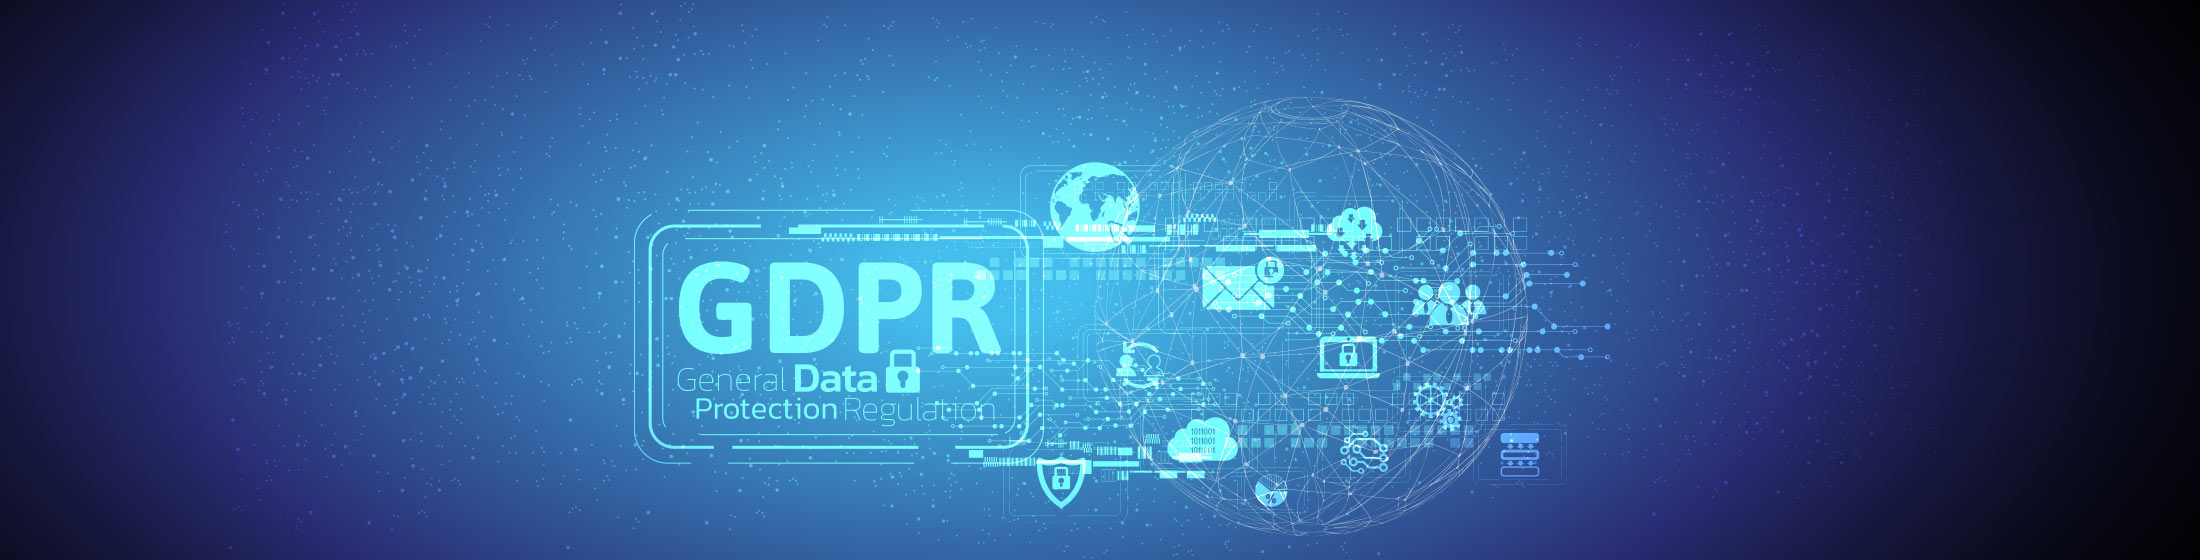 Banner-Impact of GDPR on Enterprise Cybersecurity Practices